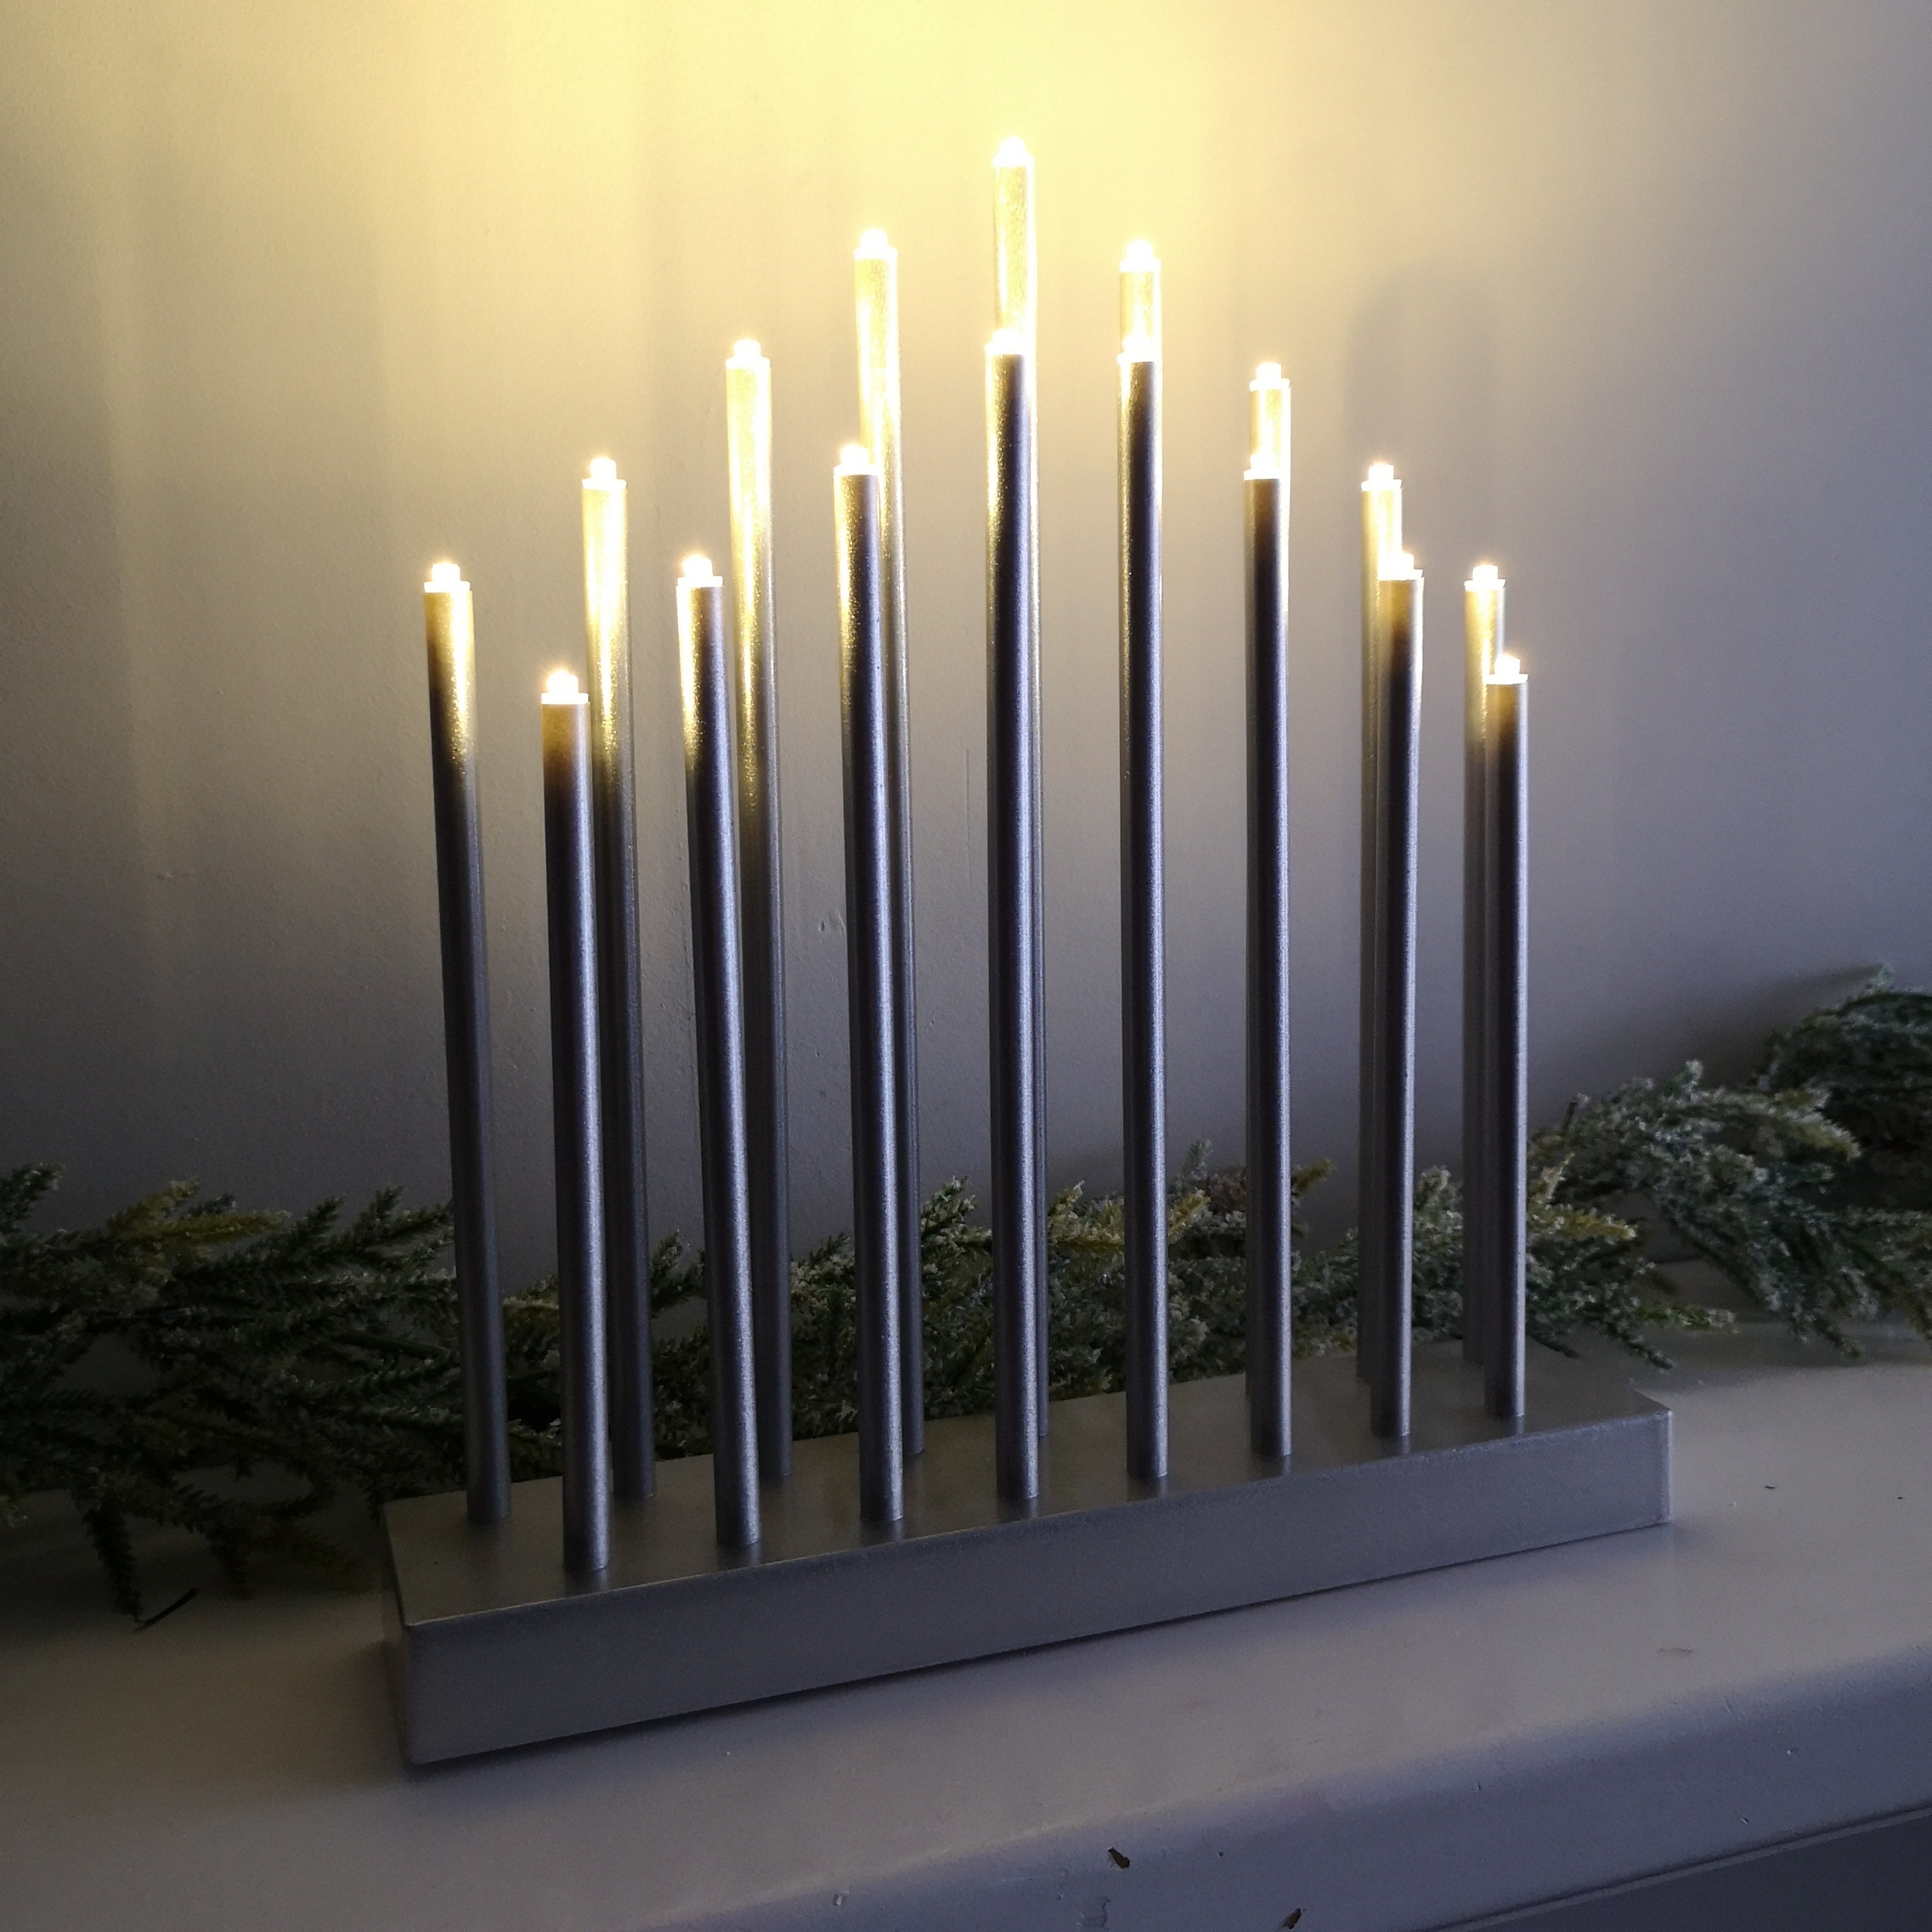 29cm Premier Christmas  Candle Bridge with 17 LEDs & Timer in Silver Battery Operated